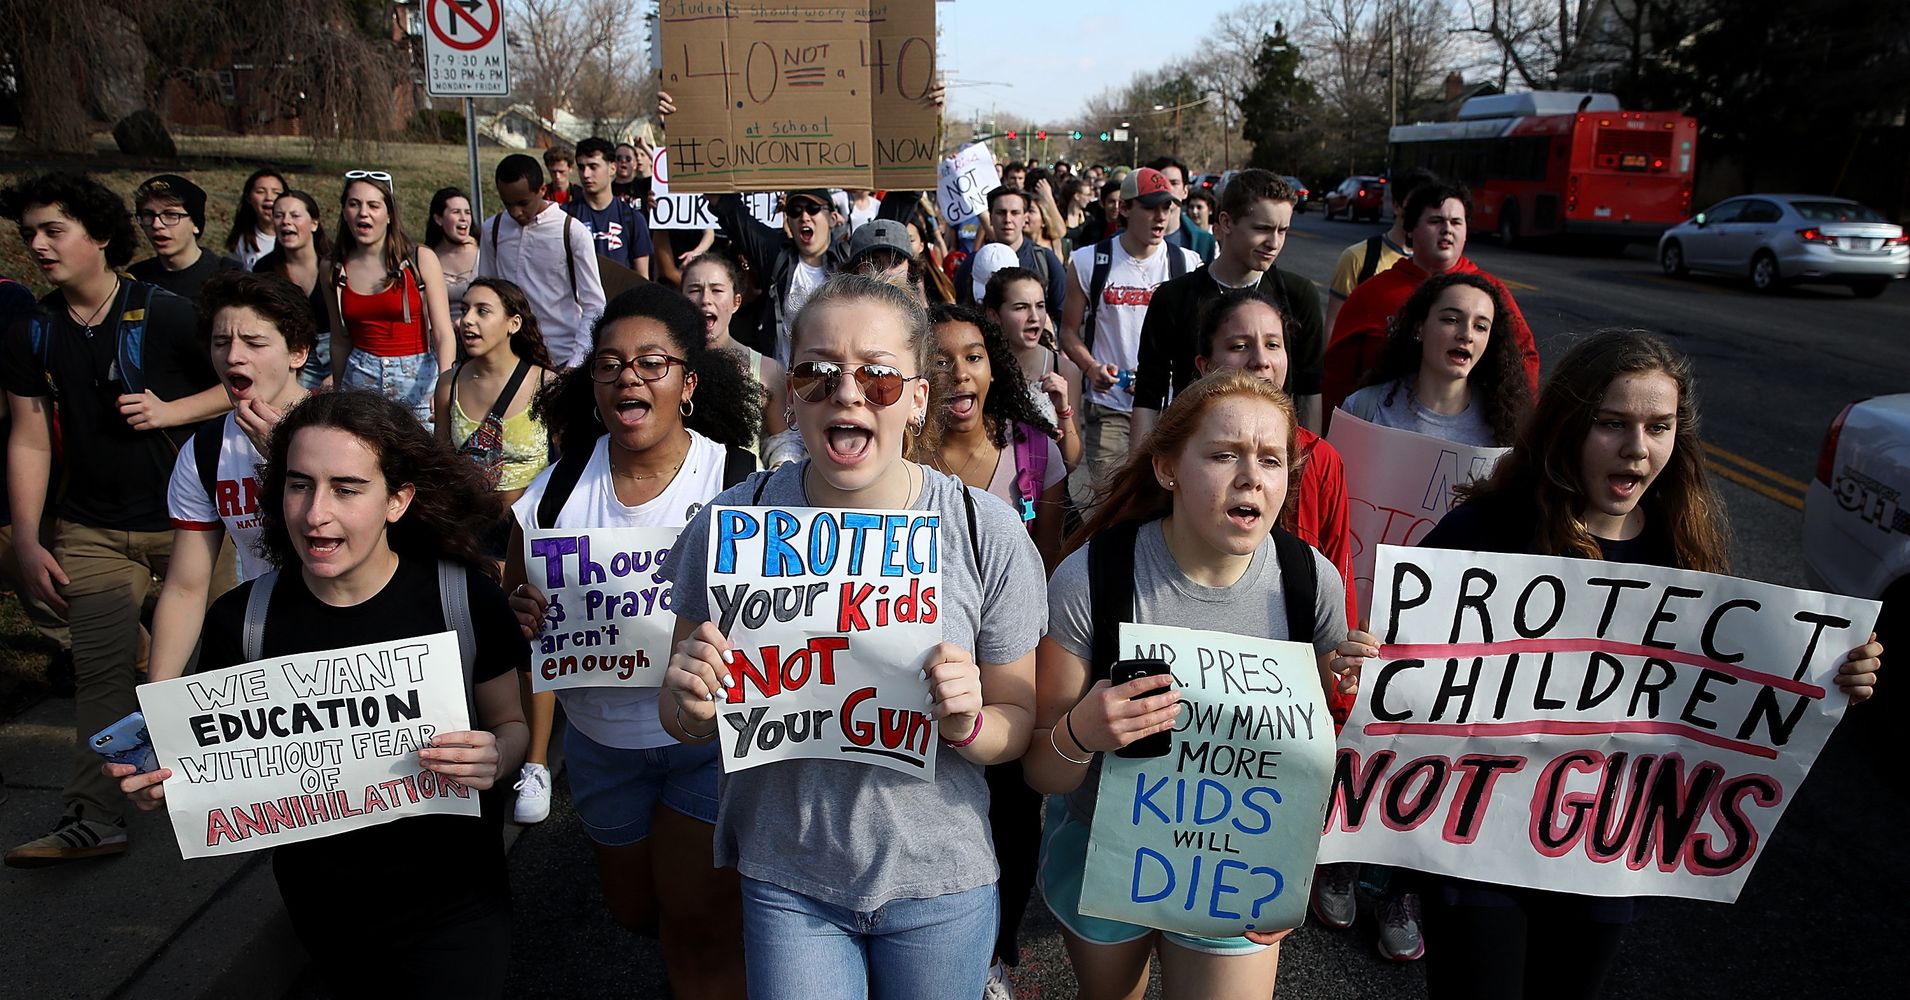 Here Are The Biggest Nationwide Gun Control Protests Planned | HuffPost